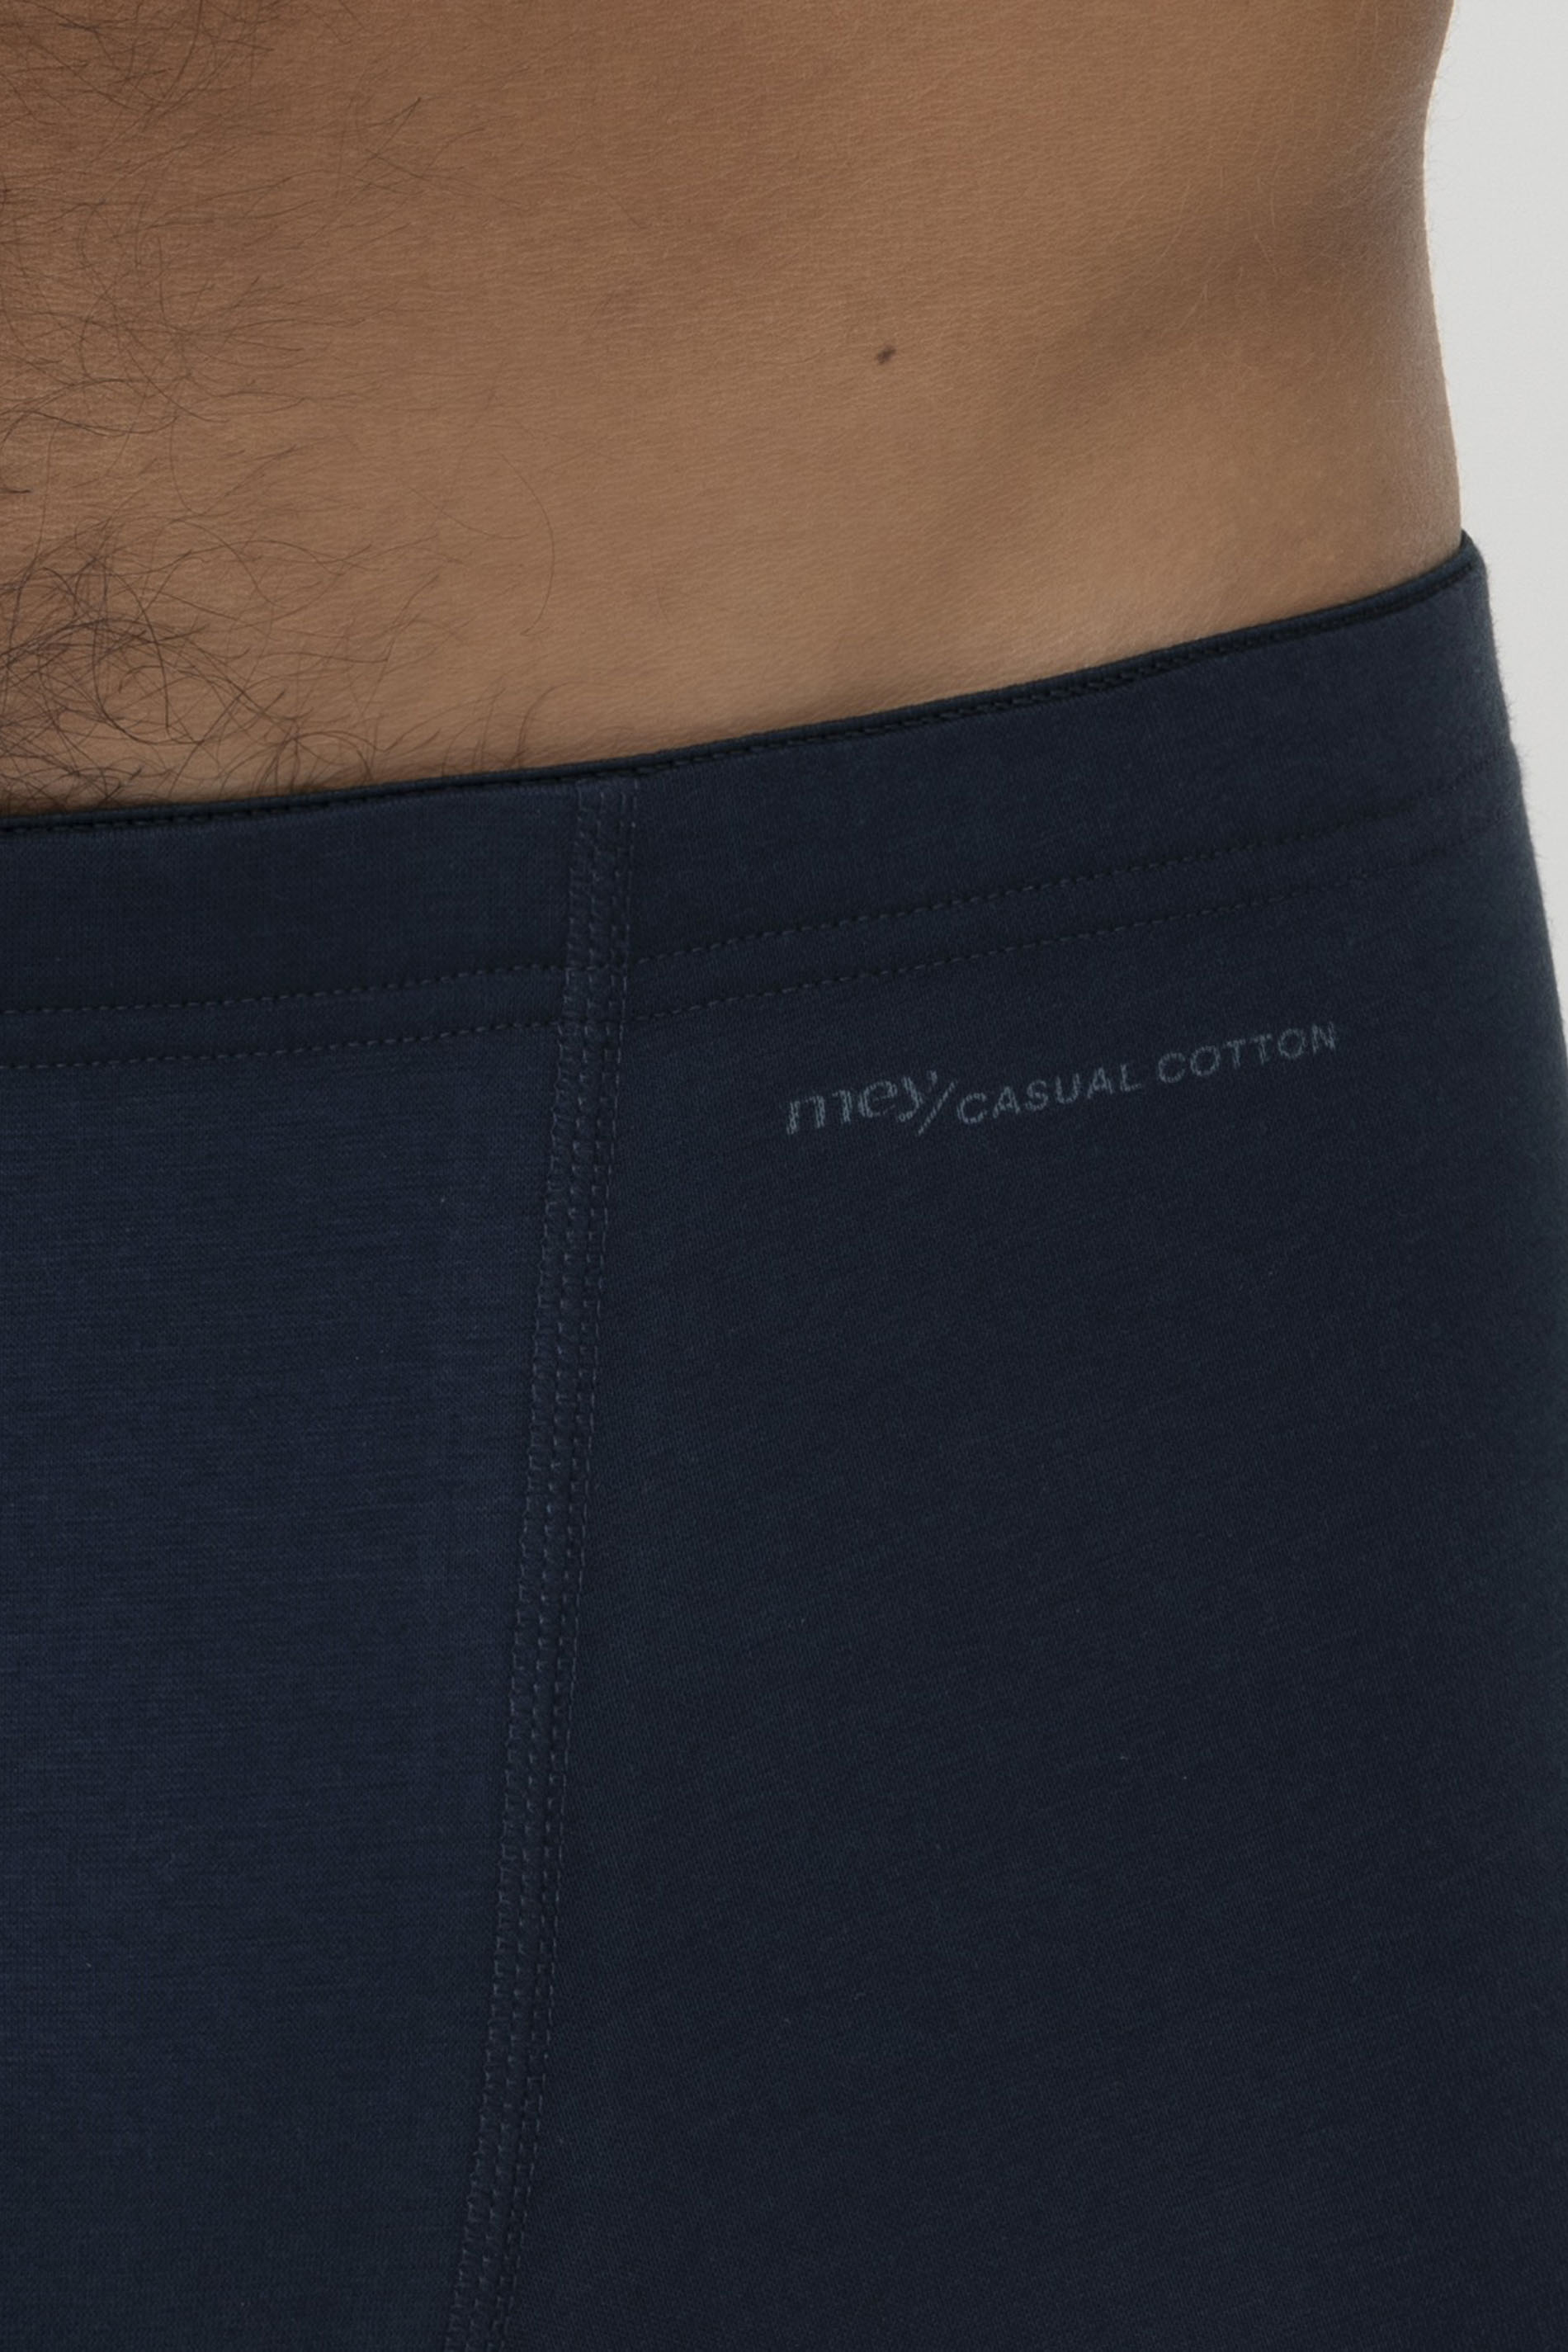 Shorty Yacht Blue Serie Casual Cotton Detail View 01 | mey®